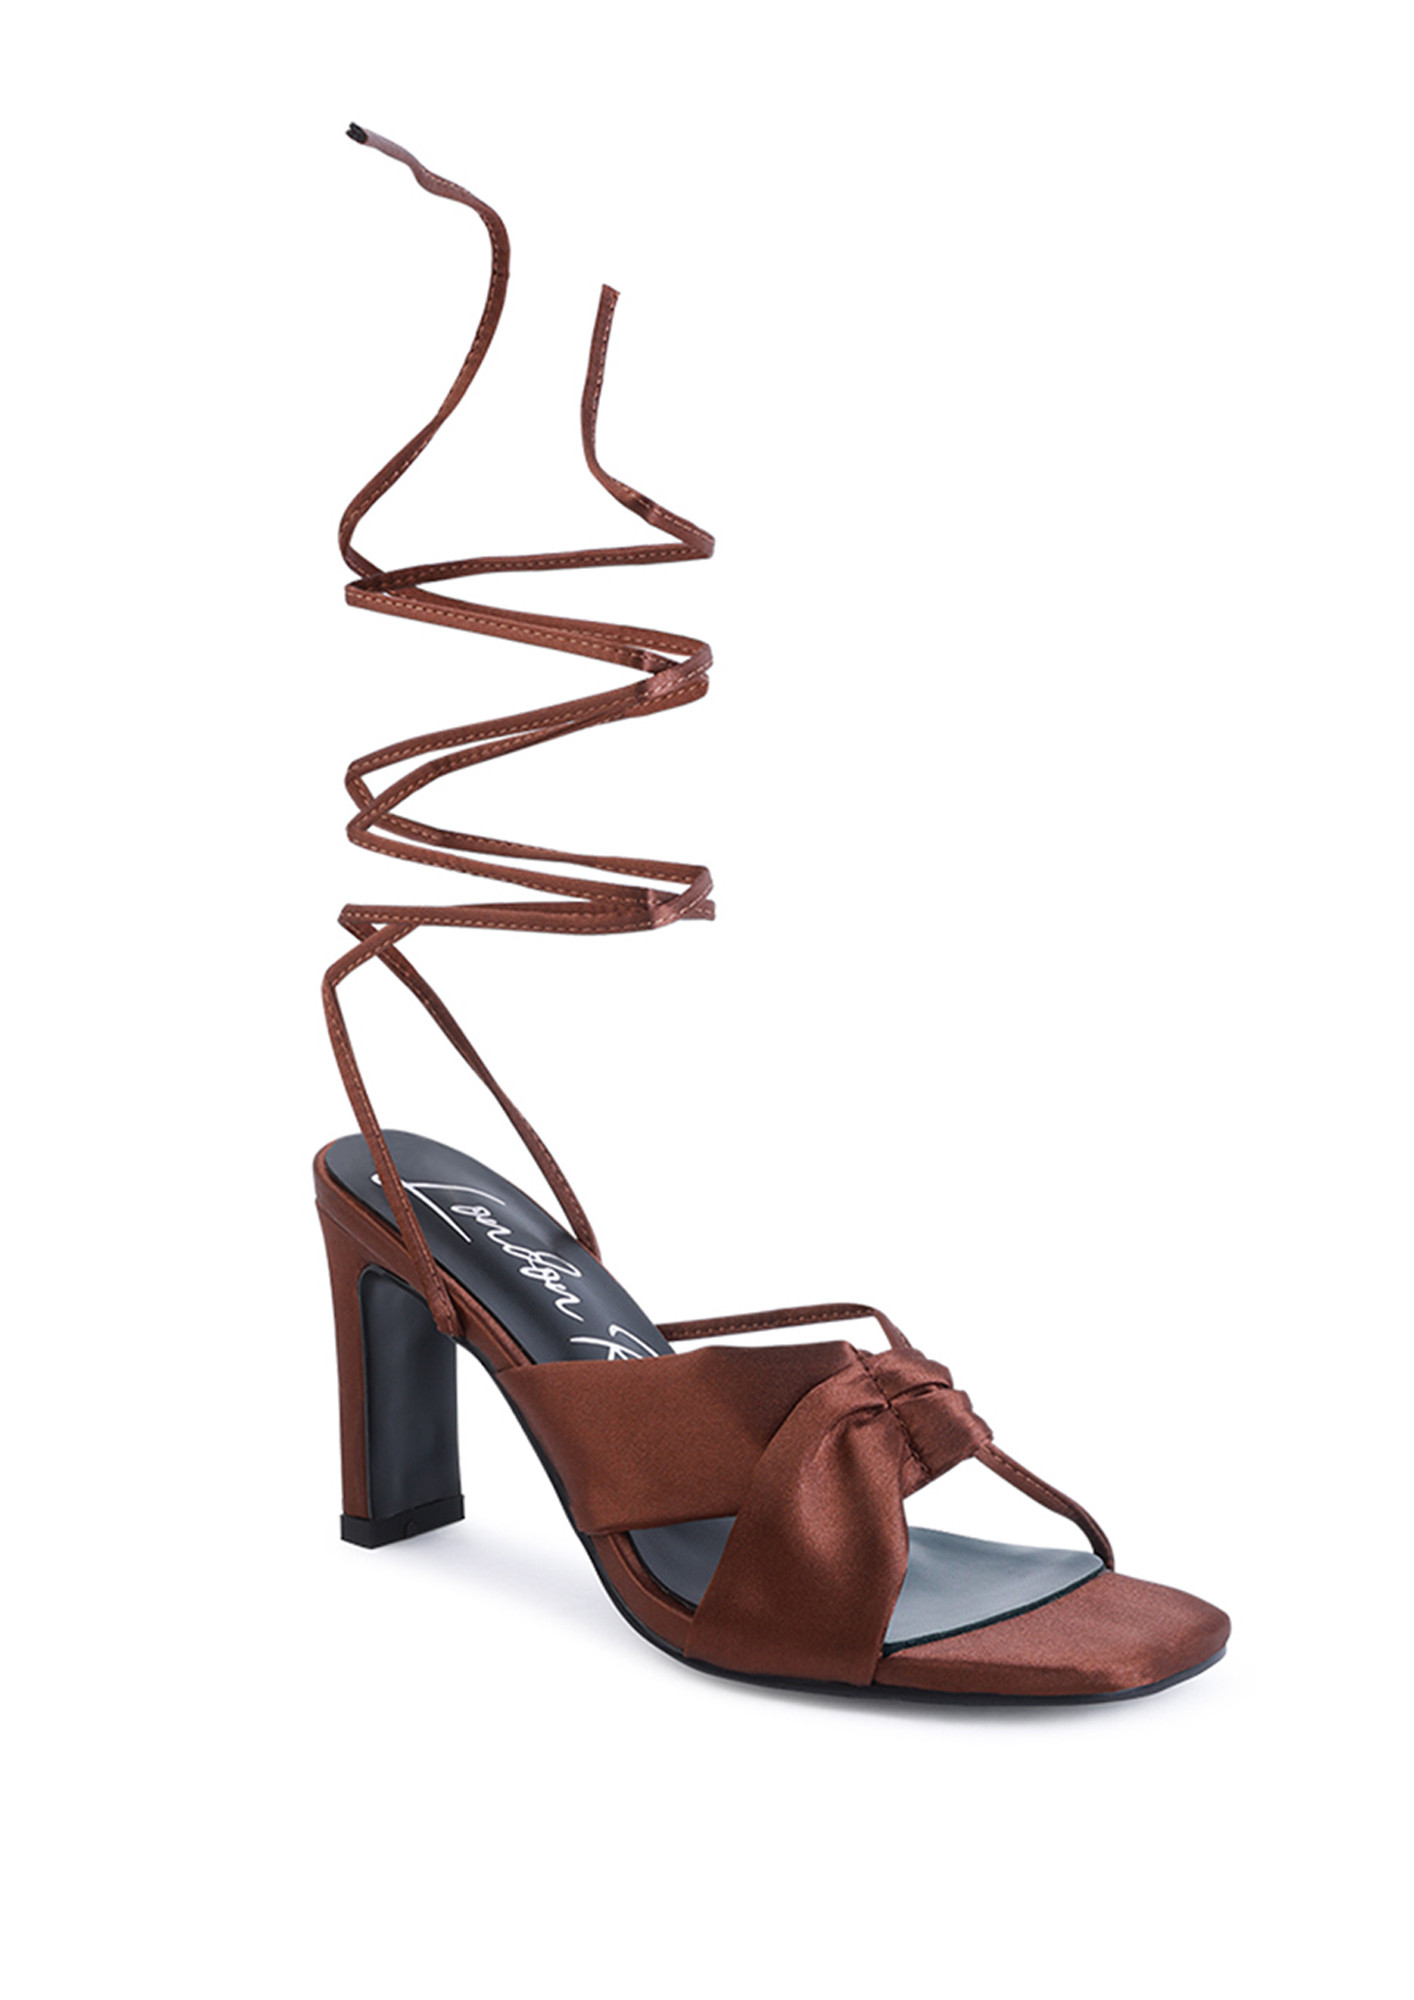 LACE UP FLAT SANDALS  Brown  ZARA India